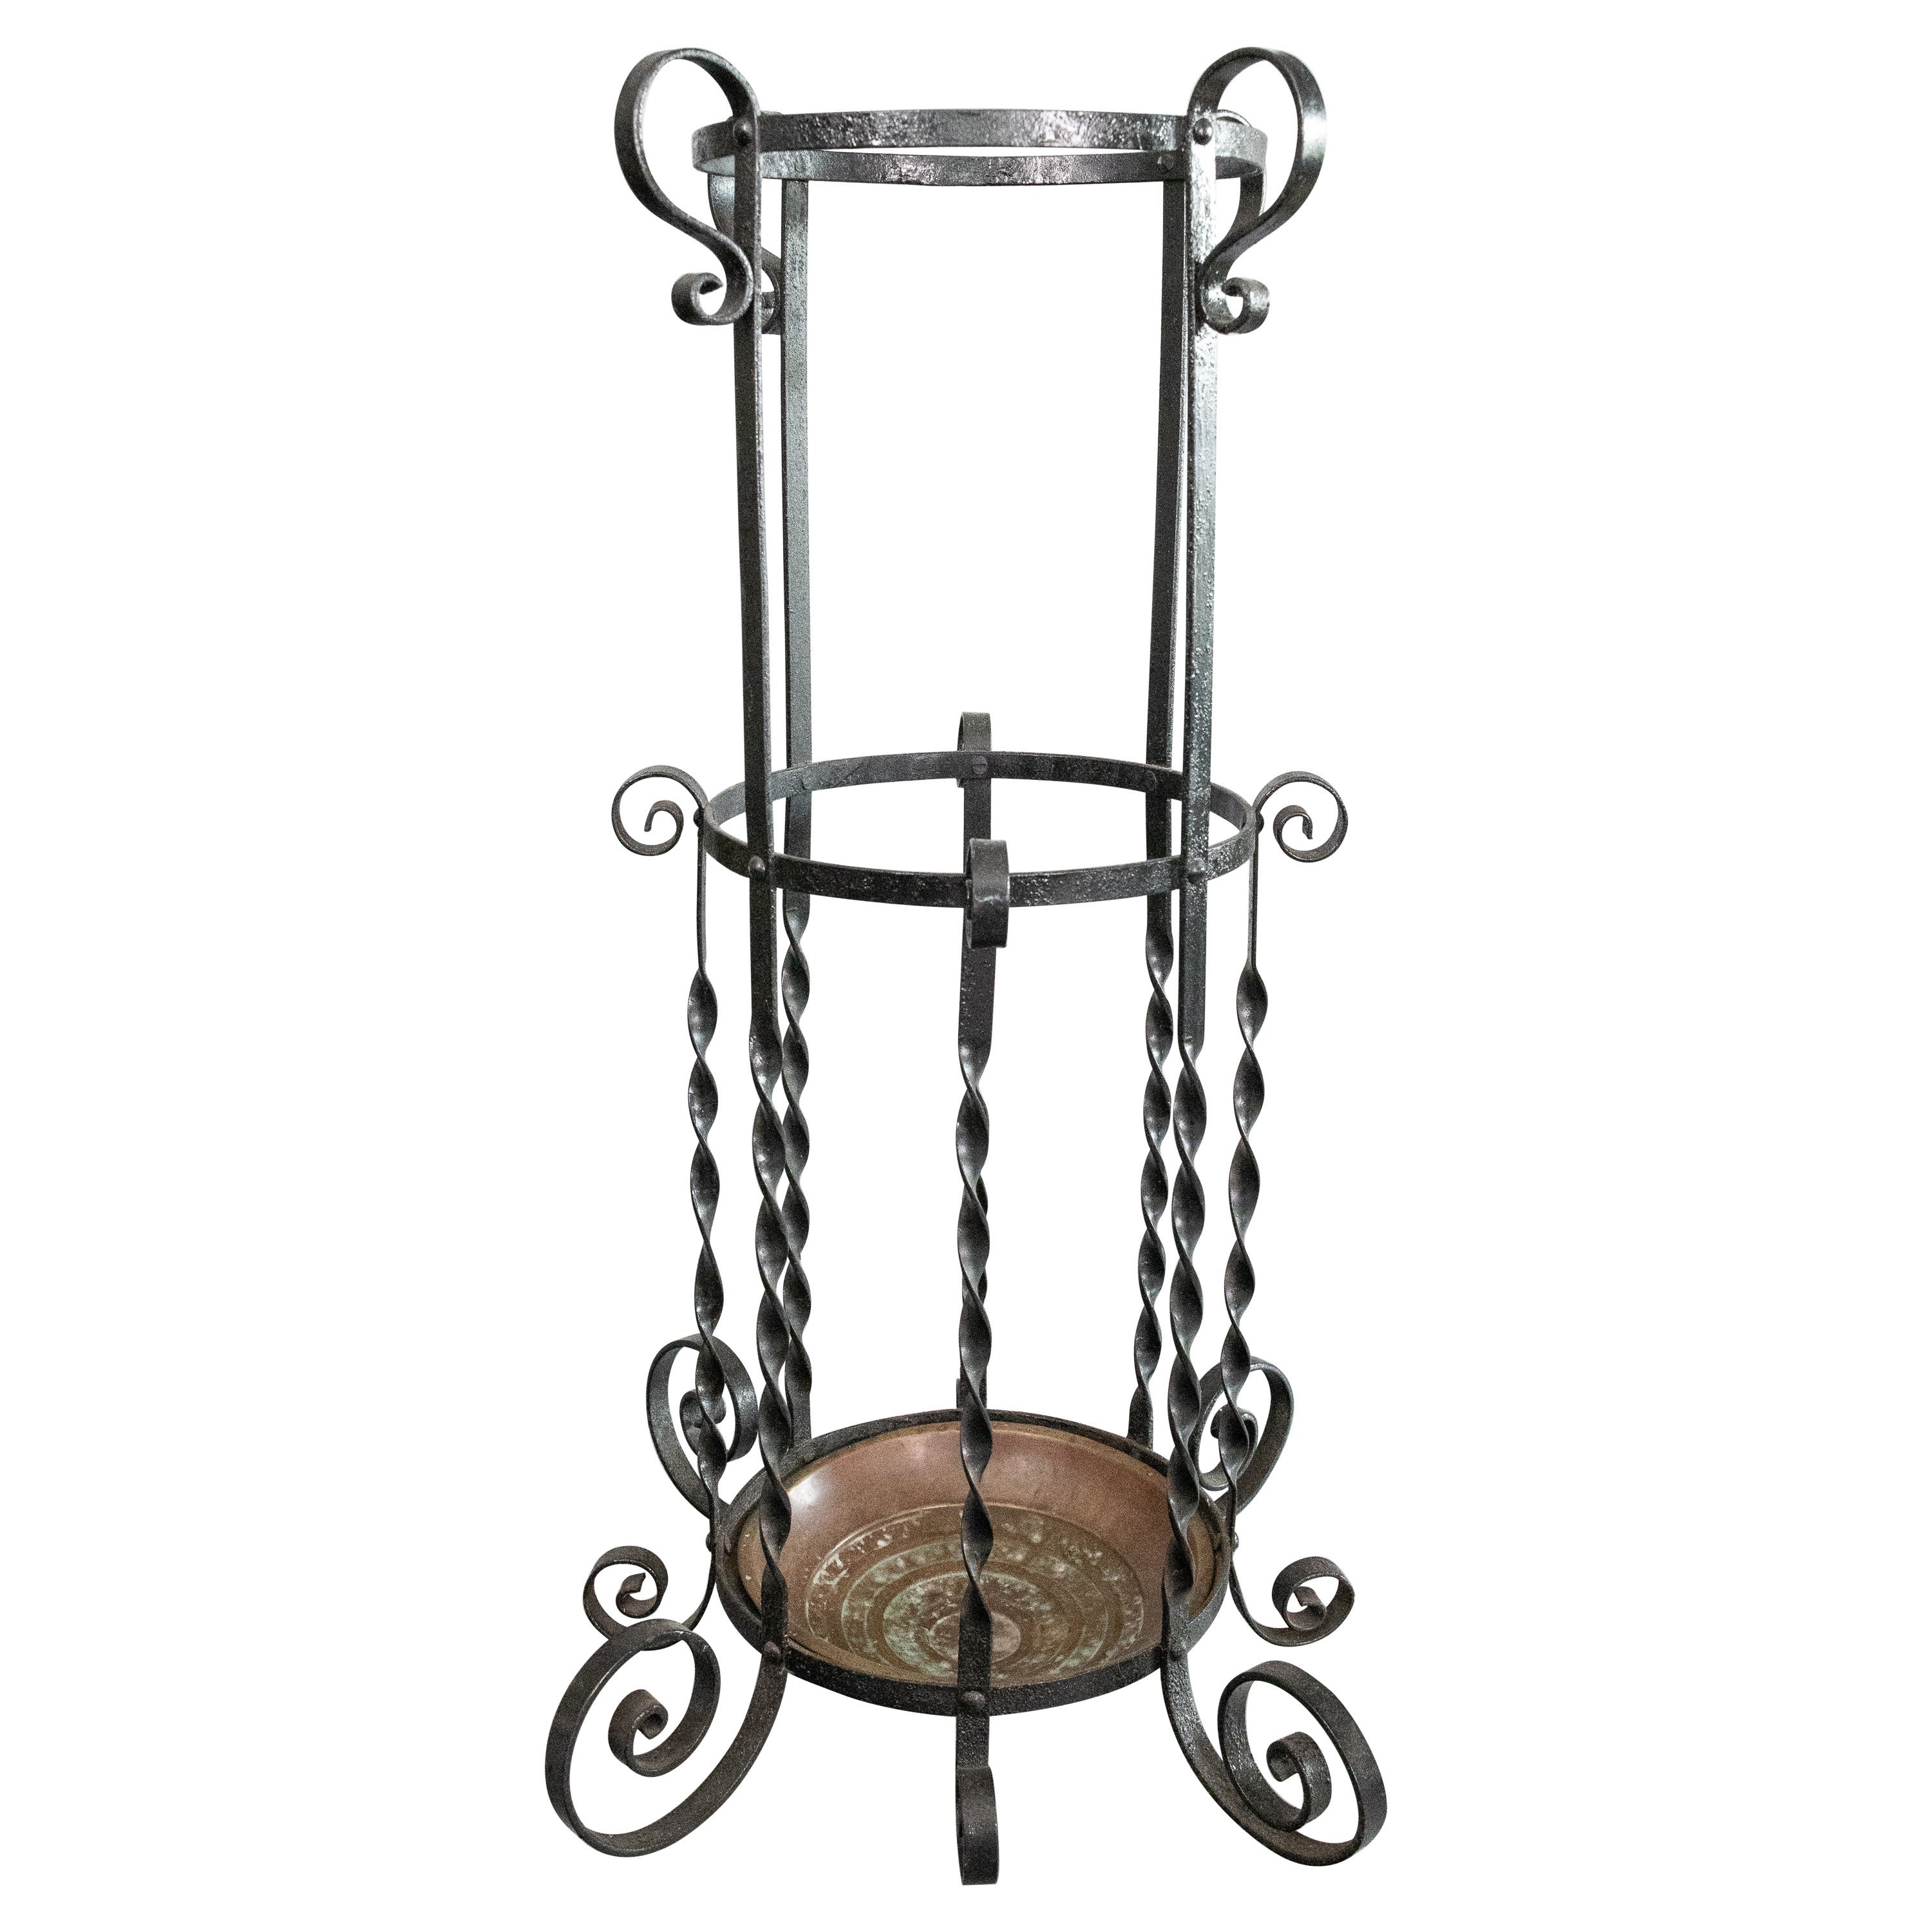 Antique French Wrought Iron Umbrella Stand For Sale